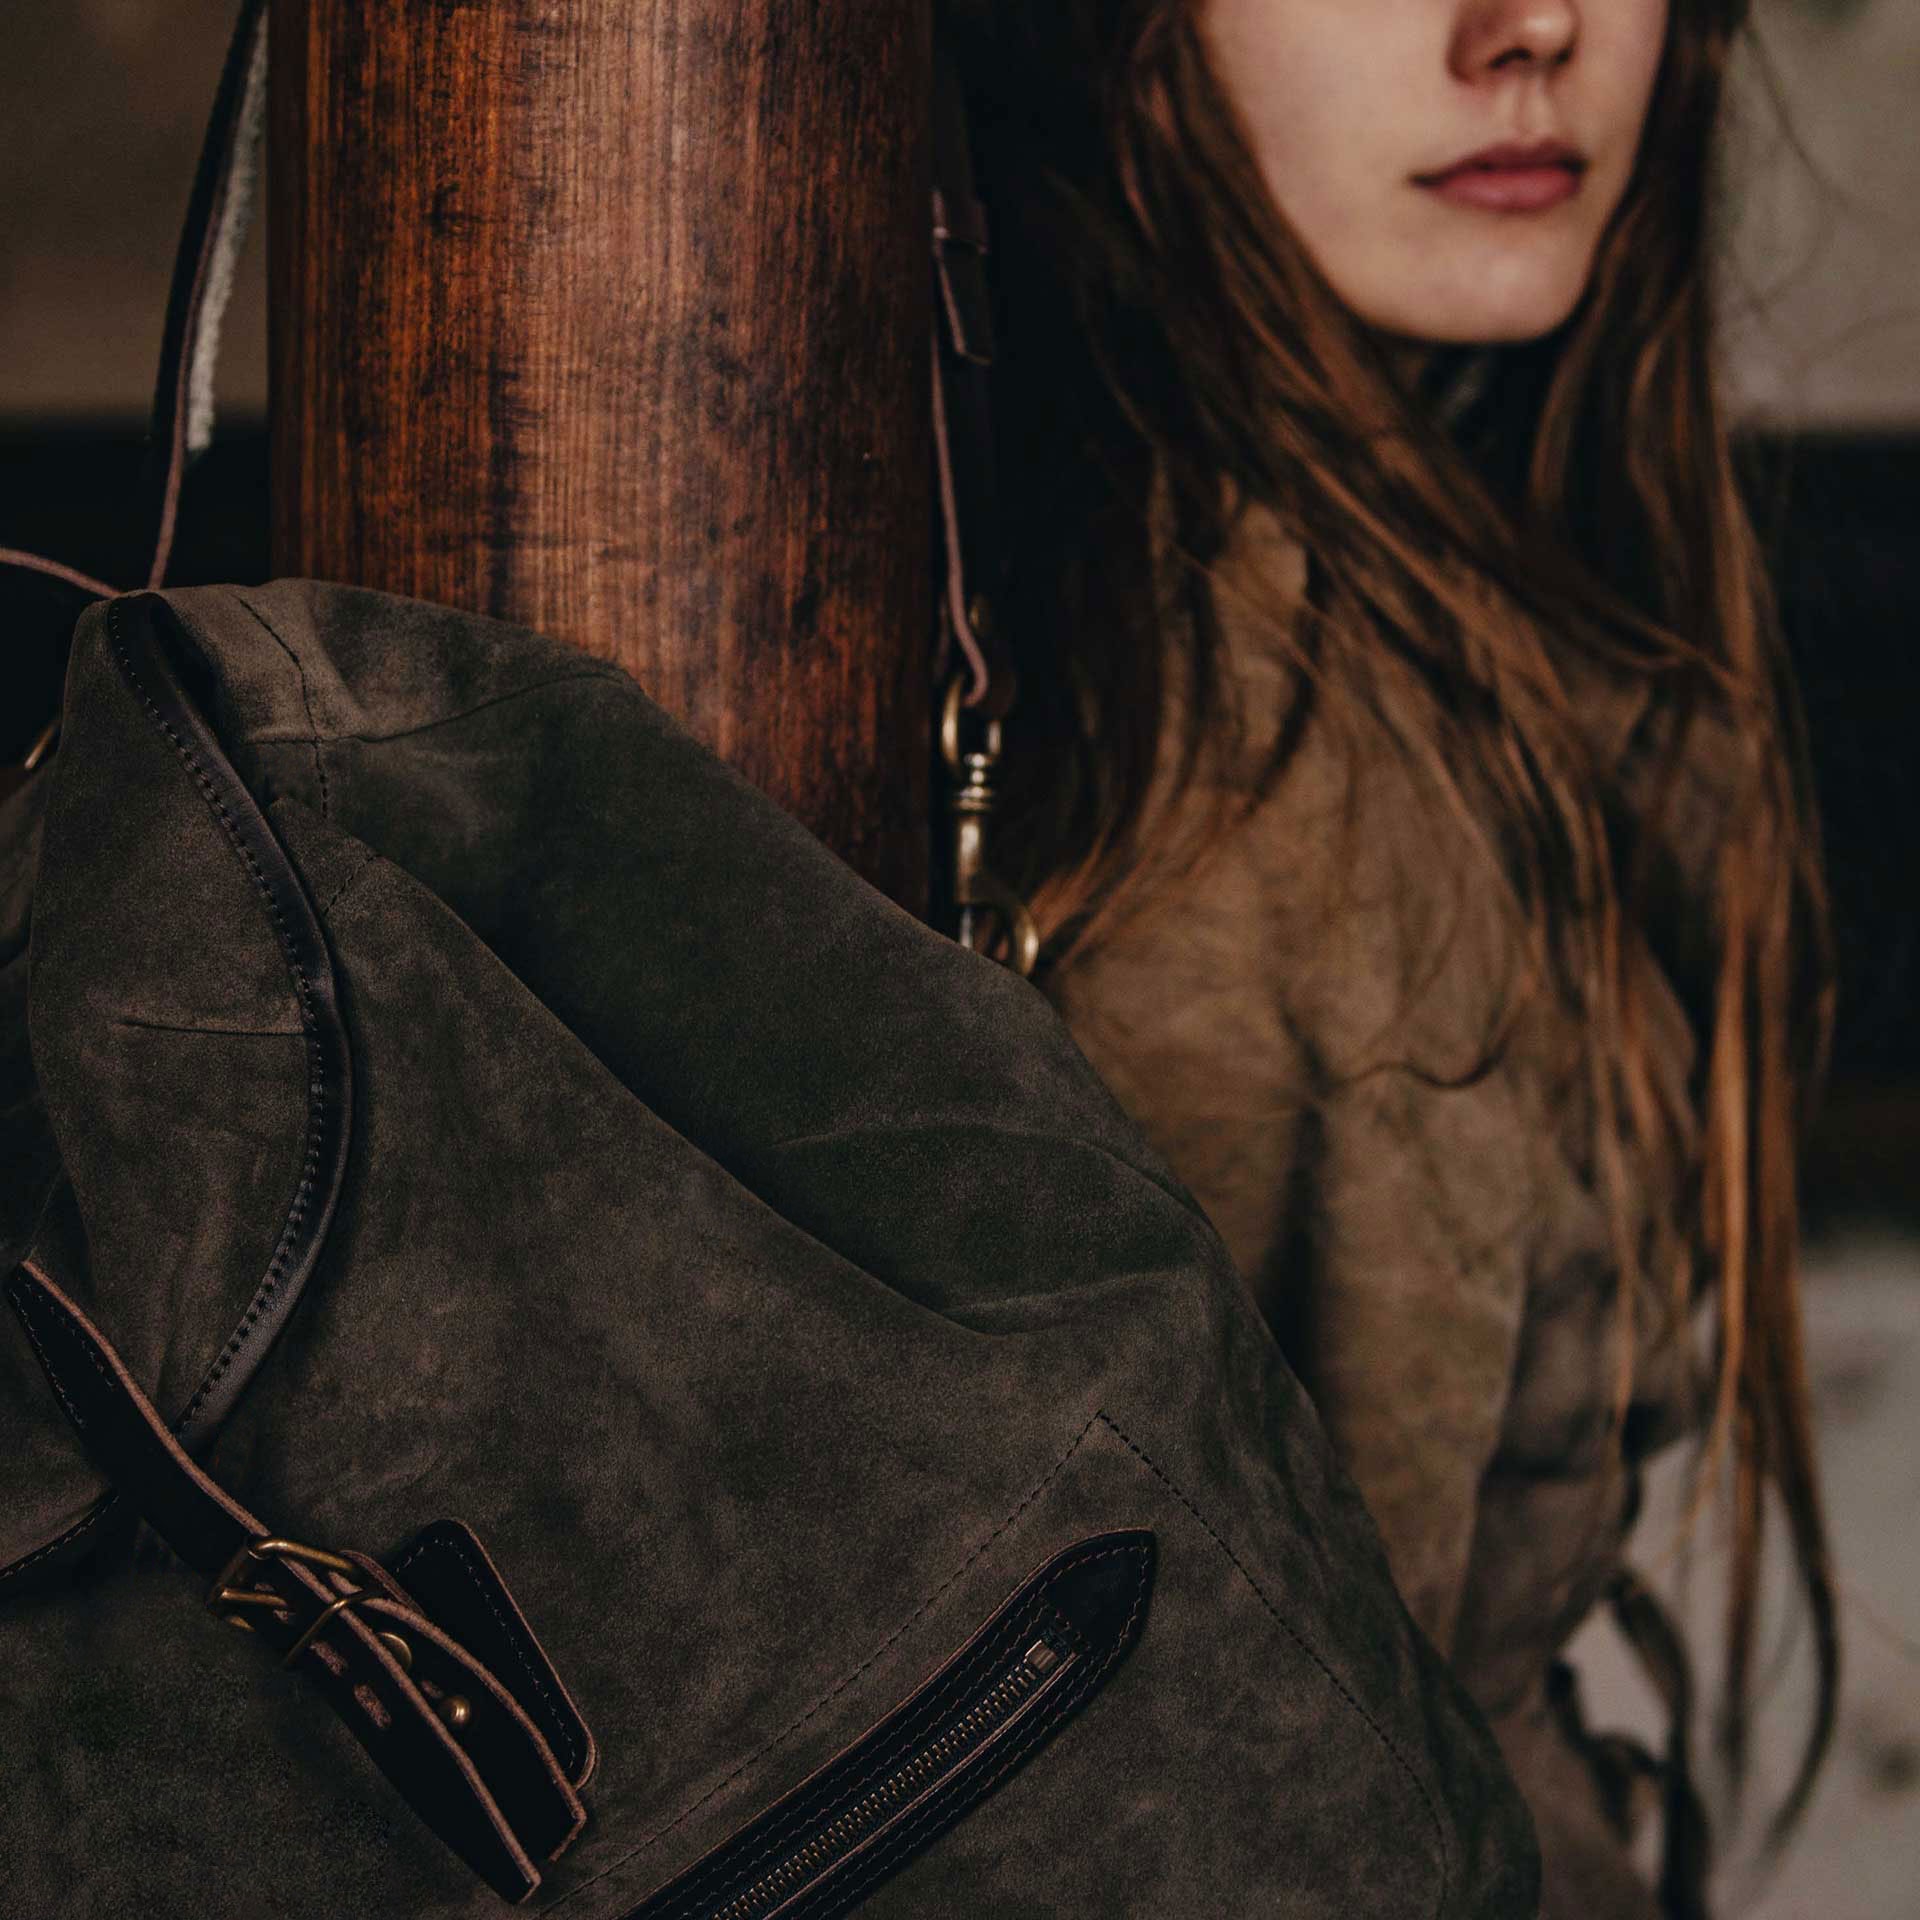 bleu de chauffe - The Camp suede leather backpack shot in good